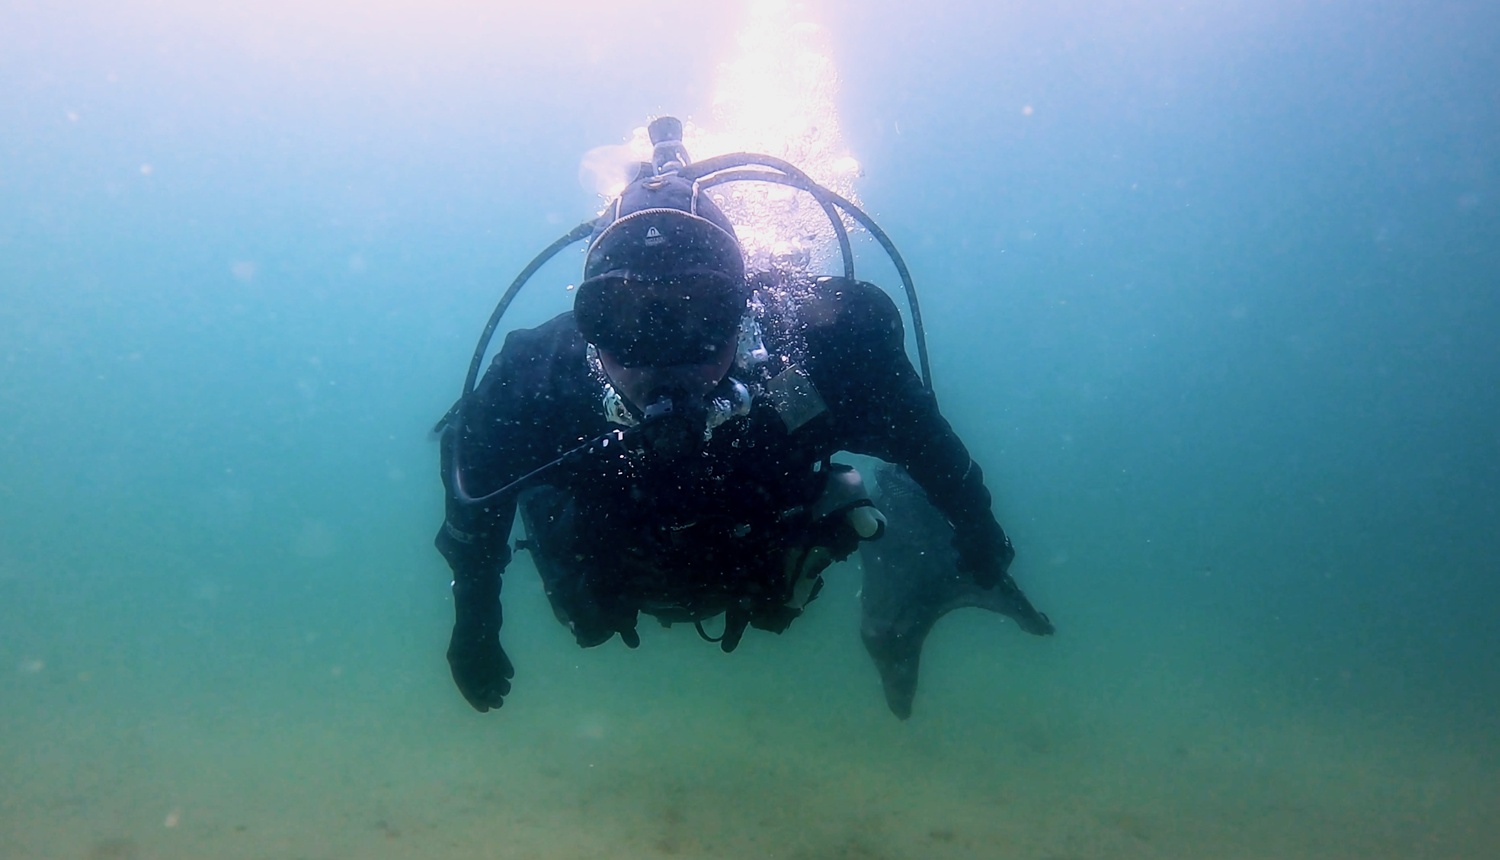 Diving lobsterman Michael Packard in a still from David Abel's new documentary 